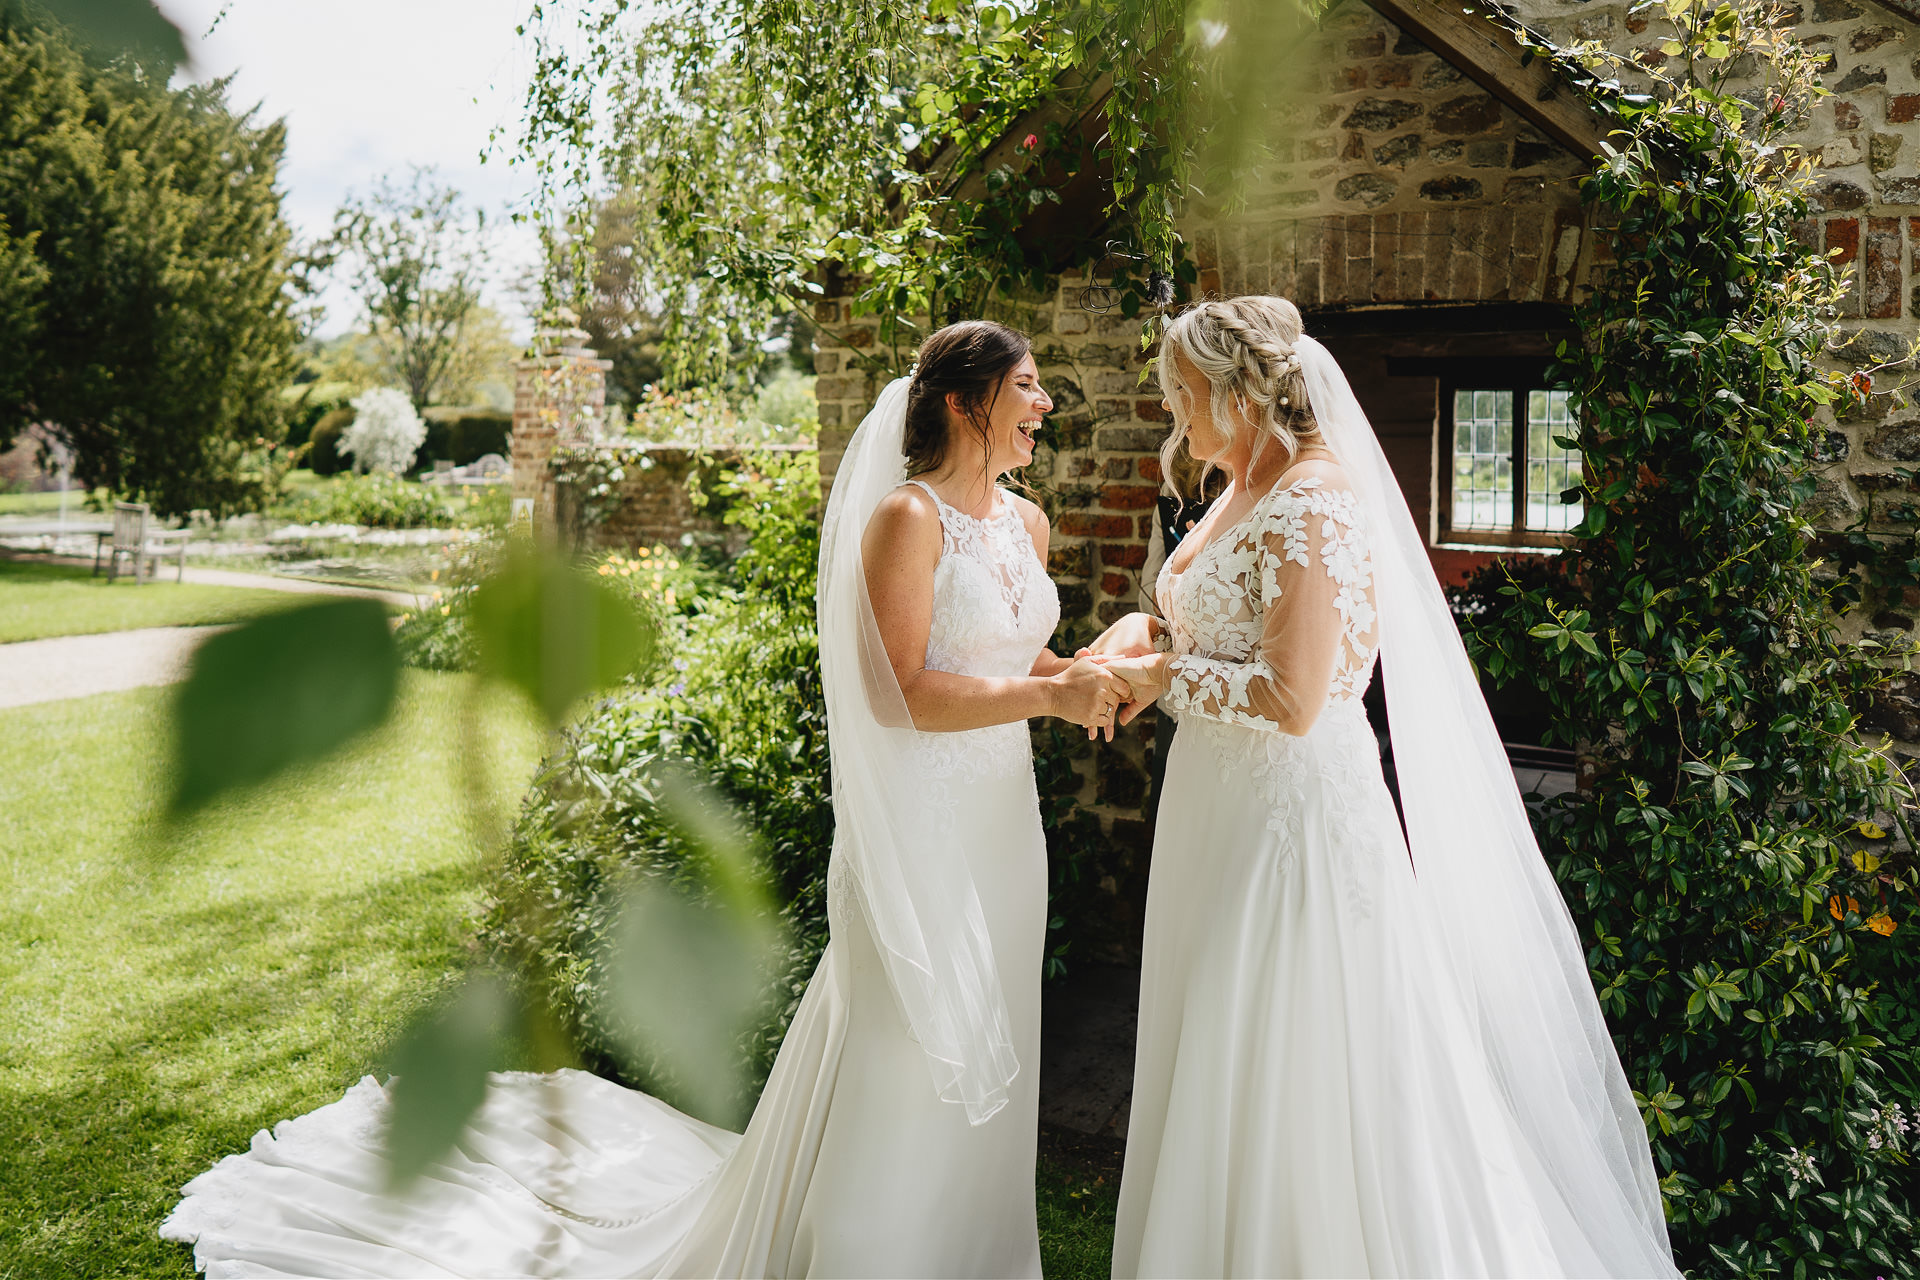 Two brides just married in an outdoor garden setting at Cadhay in Devon